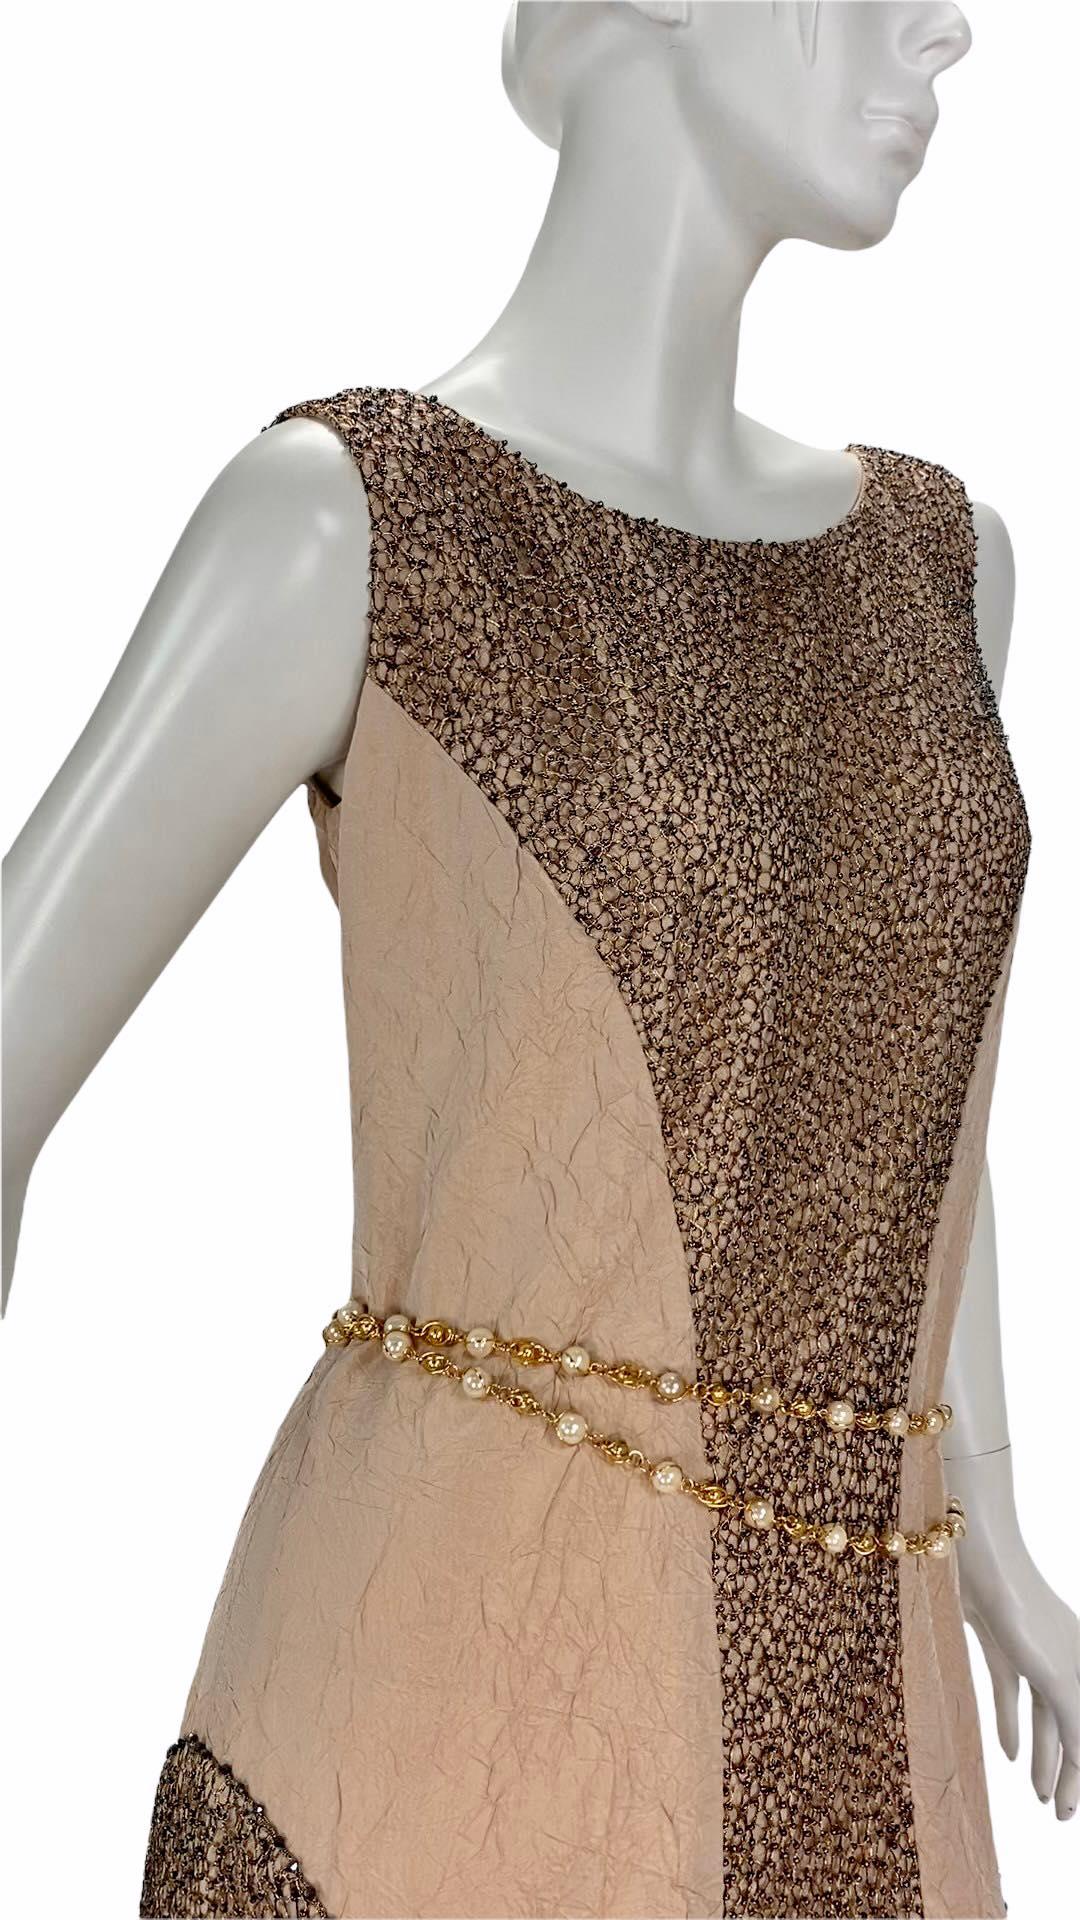 Cruise 2000  Vintage 
Karl Lagerfeld for Chanel Embellished Dress

First Chanel Cruise Collection! Significant historical piece.

FR Size 40 - US 8

Silk Blend

Gold thread, beads

Excellent condition (belt is not included)
Please see attached video